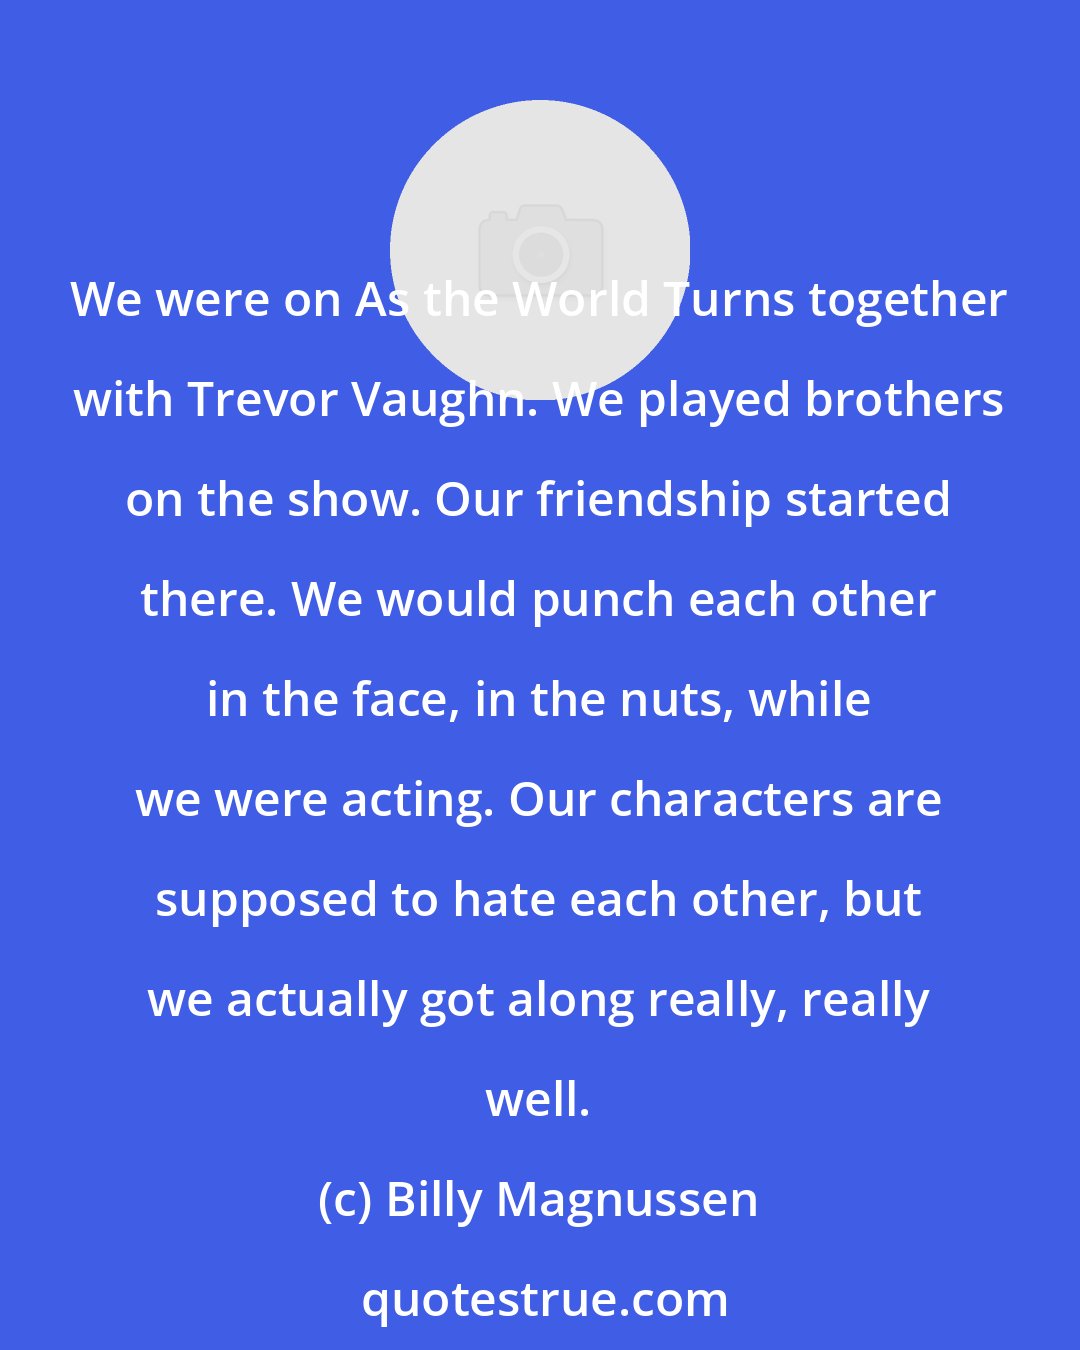 Billy Magnussen: We were on As the World Turns together with Trevor Vaughn. We played brothers on the show. Our friendship started there. We would punch each other in the face, in the nuts, while we were acting. Our characters are supposed to hate each other, but we actually got along really, really well.